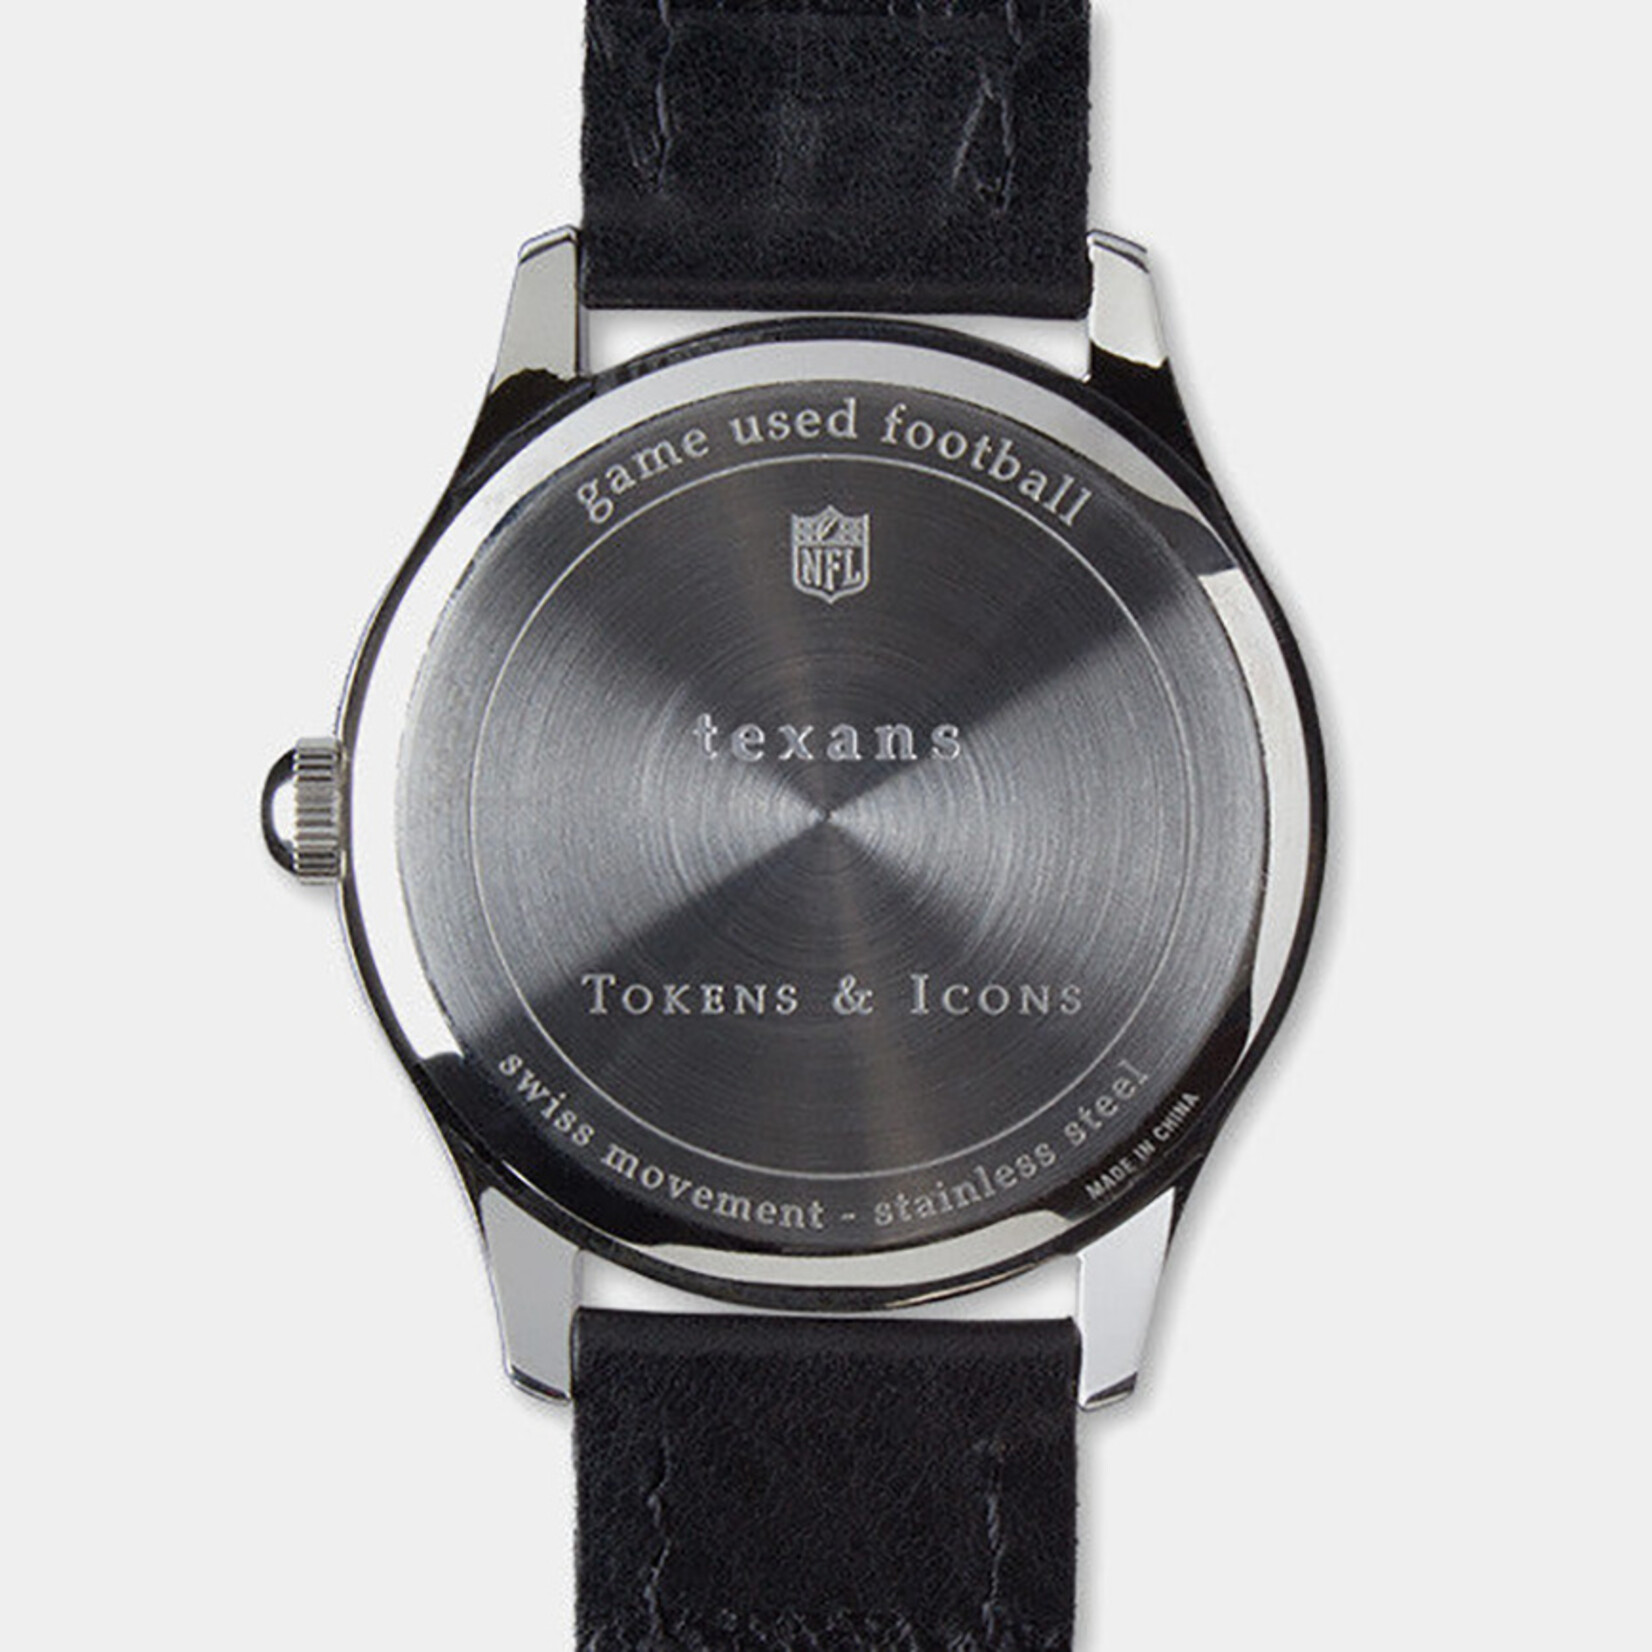 Tokens & Icons Houston Texans Game Used Football Watch